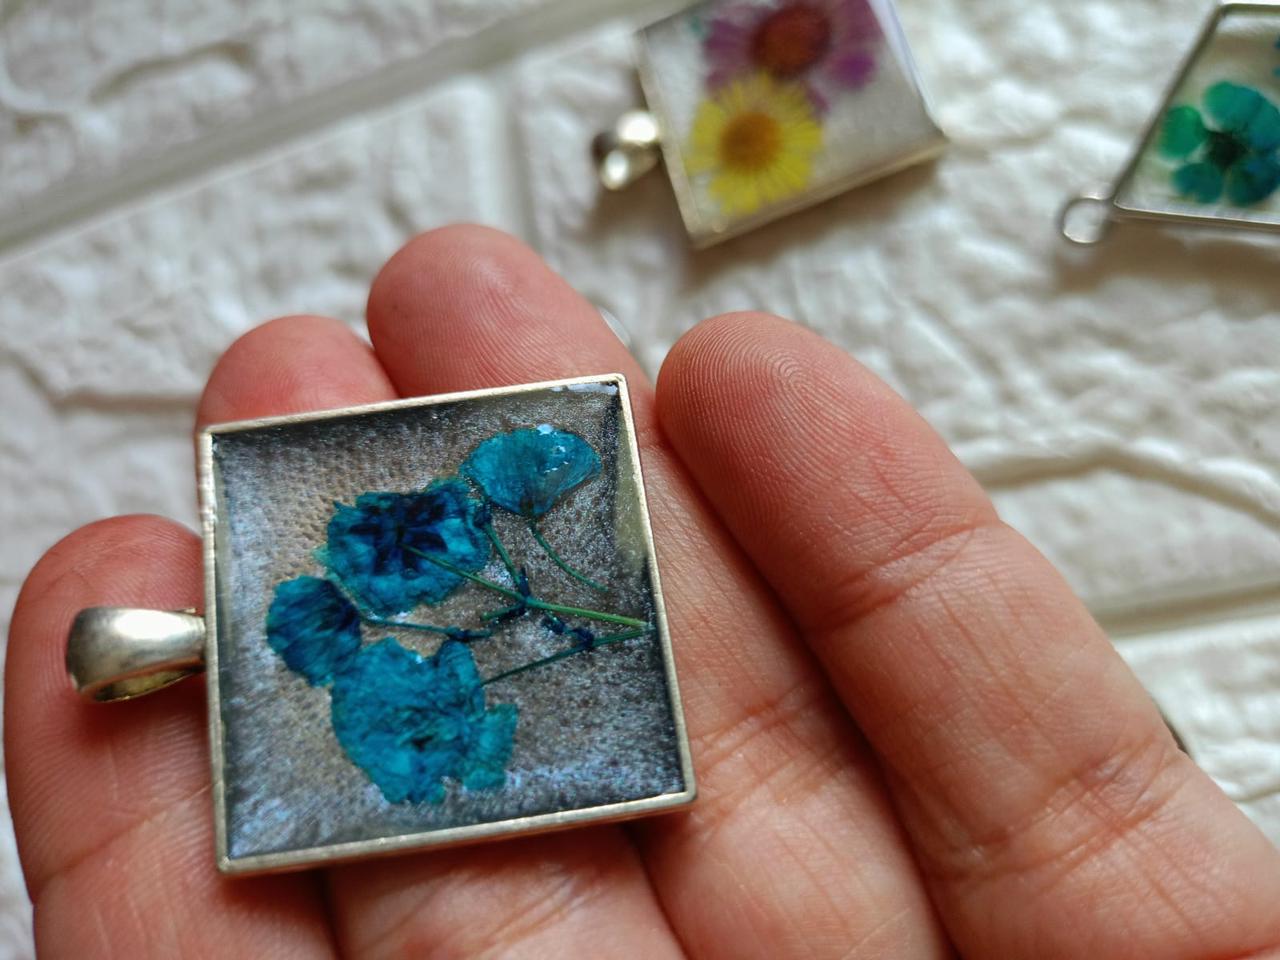 Resin Square Shaped Resin Pendant with Blue Flower Inclusion